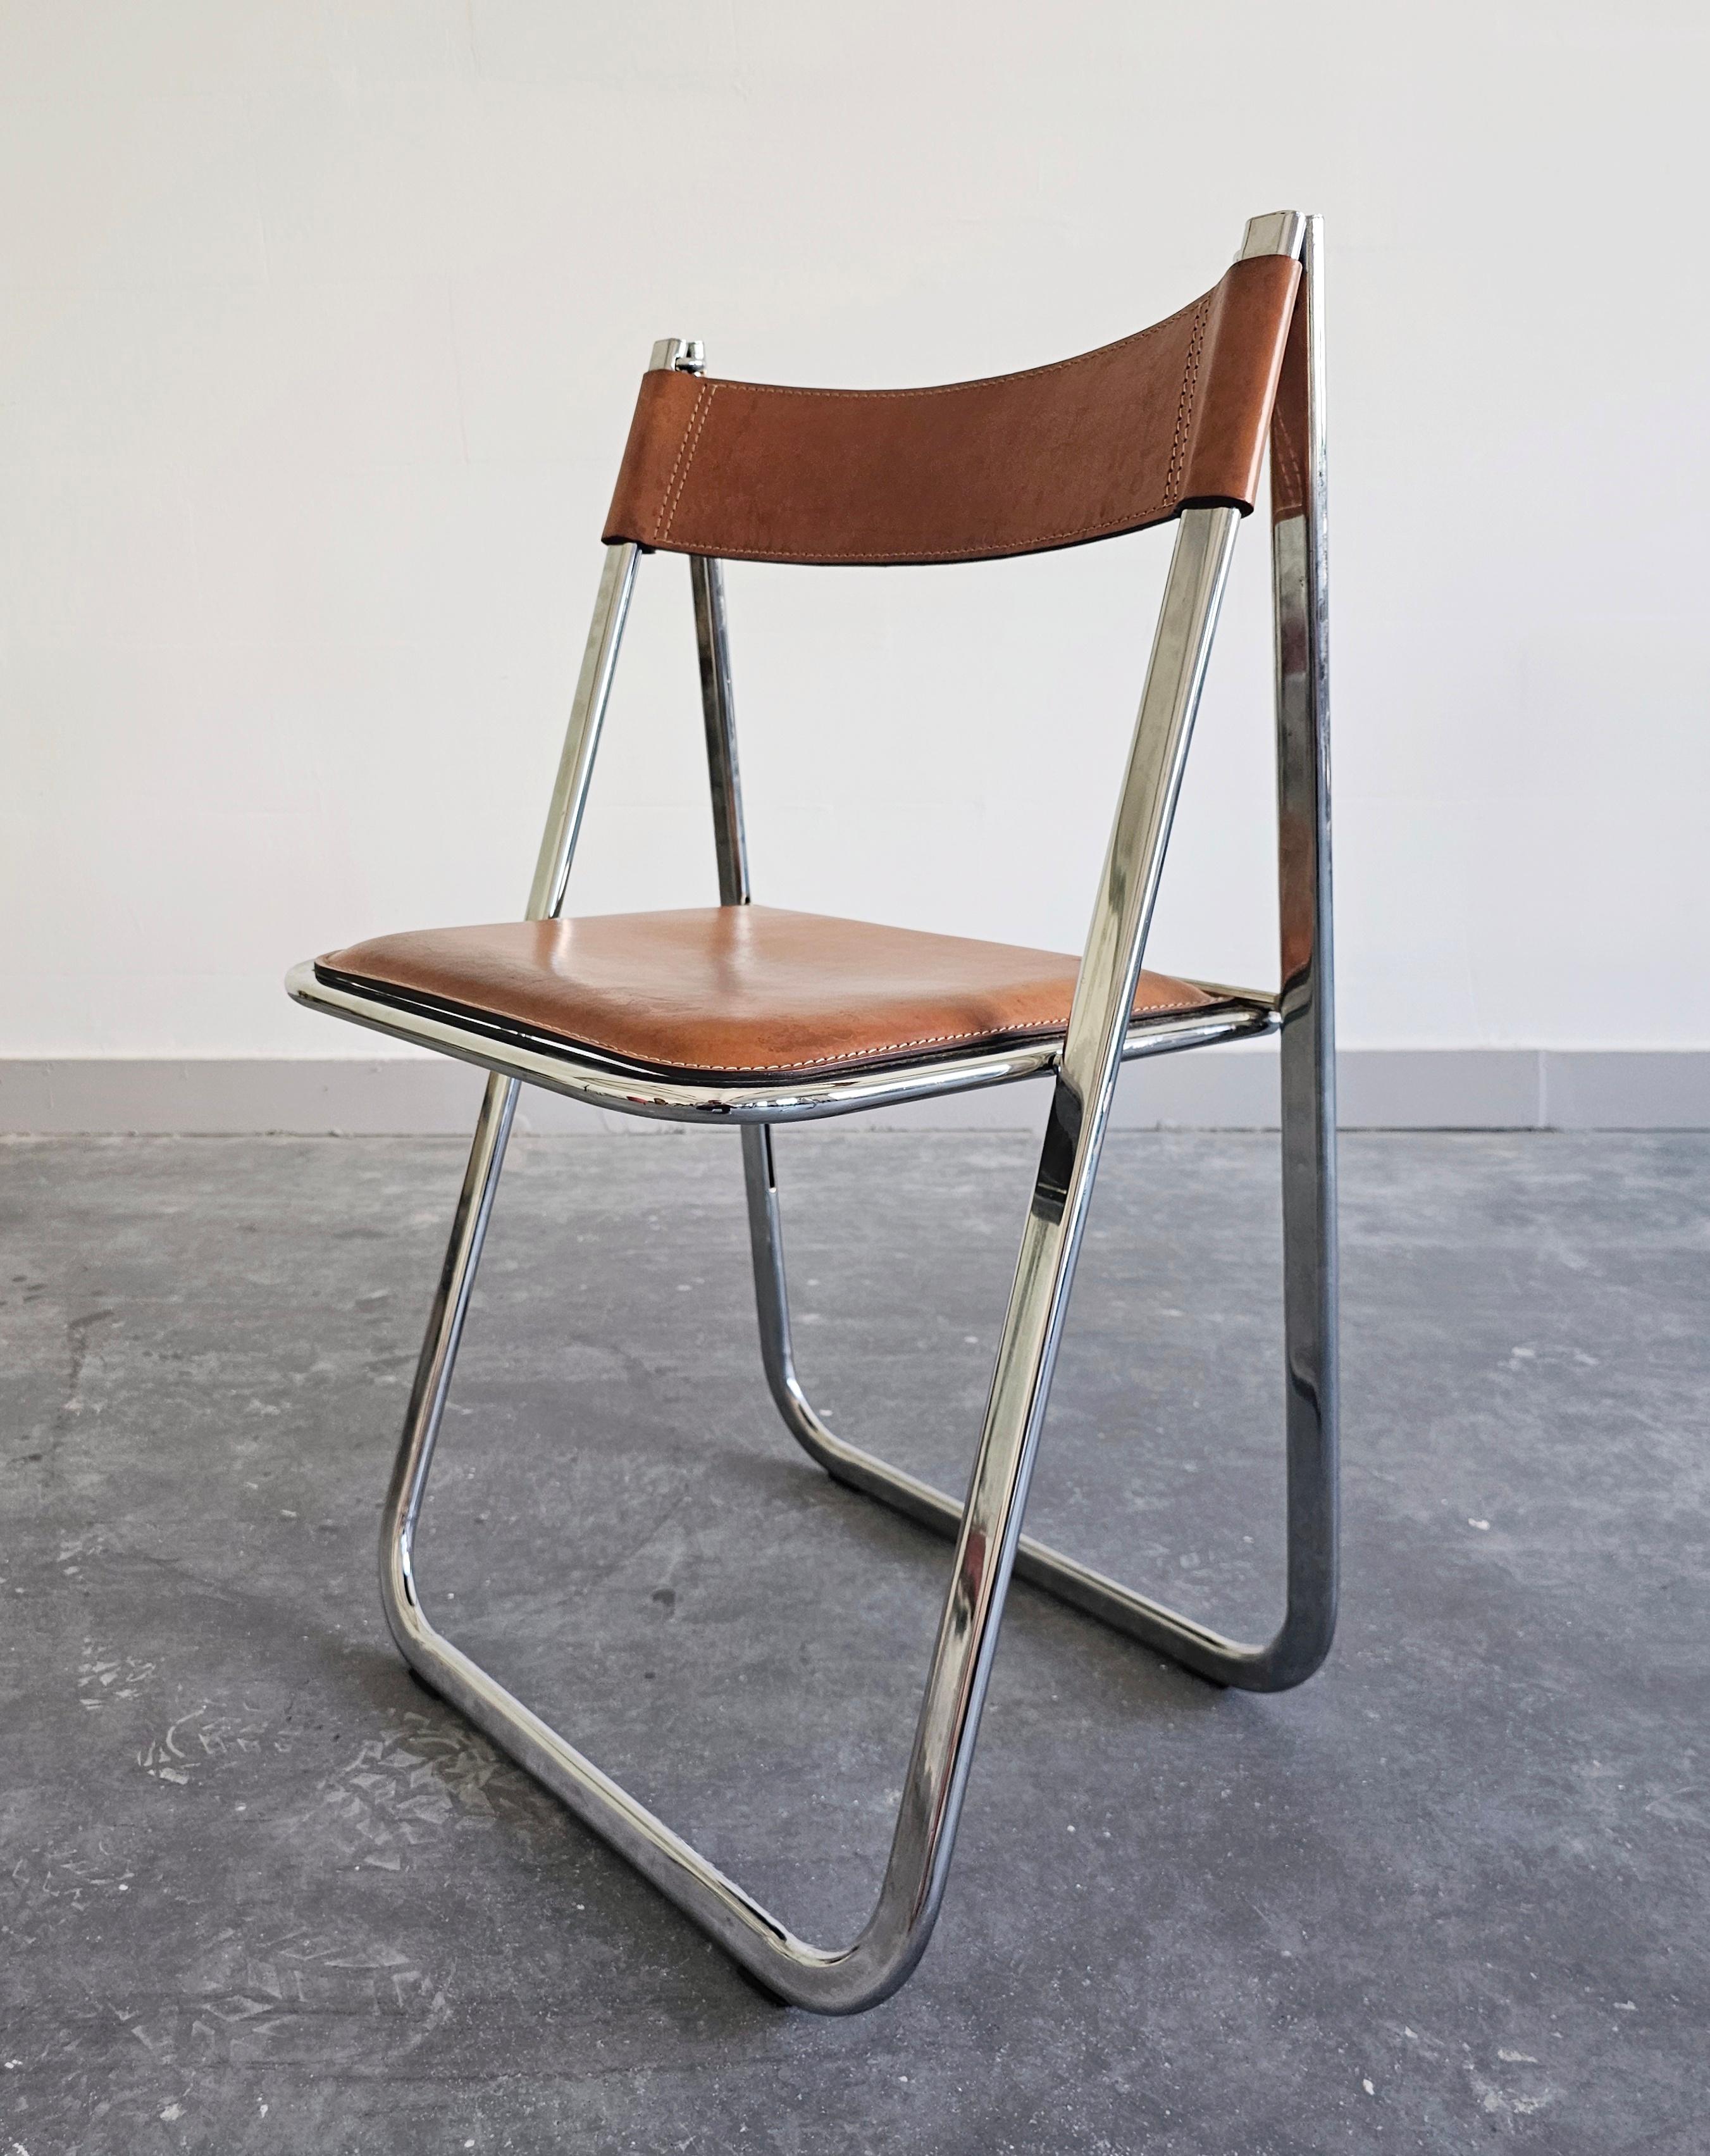 Pair of Folding Chairs by Arrben, model Tamara, in cognac leather, Italy 1970s In Good Condition For Sale In Beograd, RS